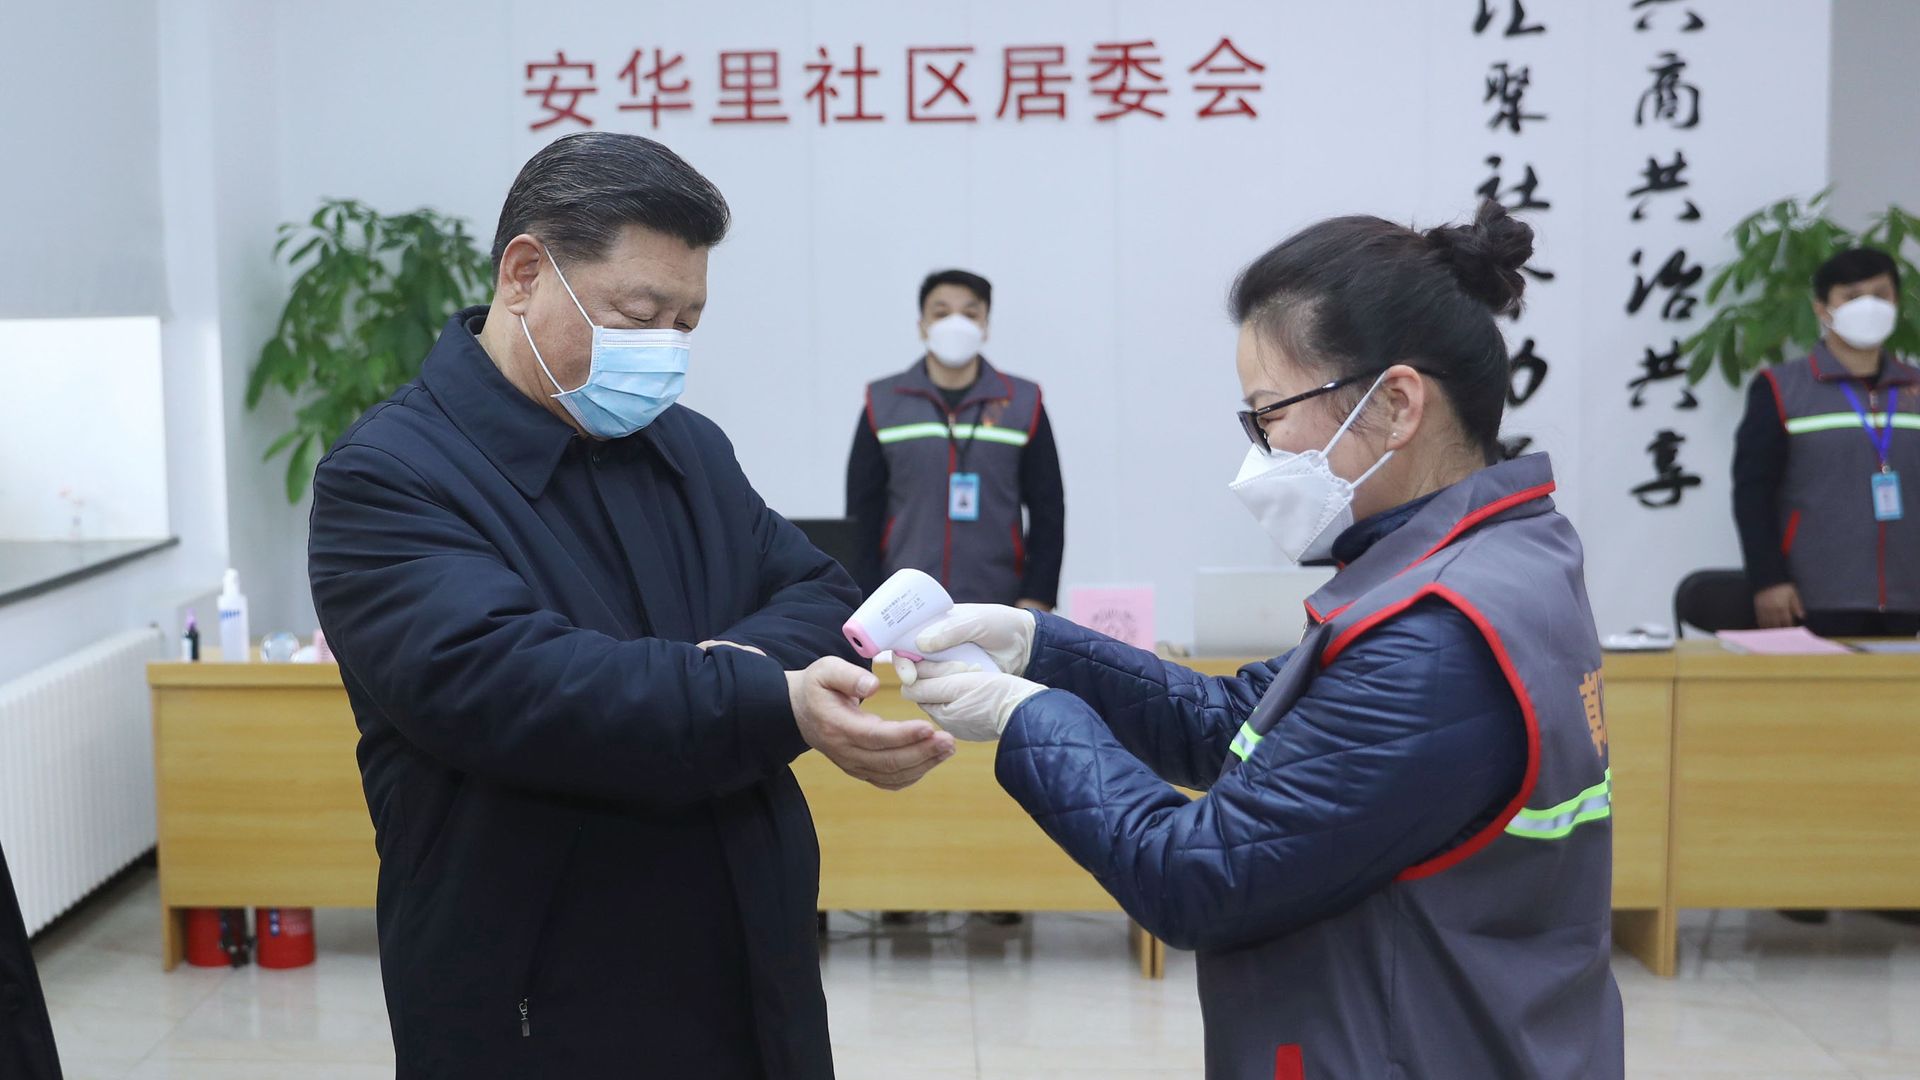 In this image, Xi Jinping wears a face mask and has his temperature read via scanning his wrist